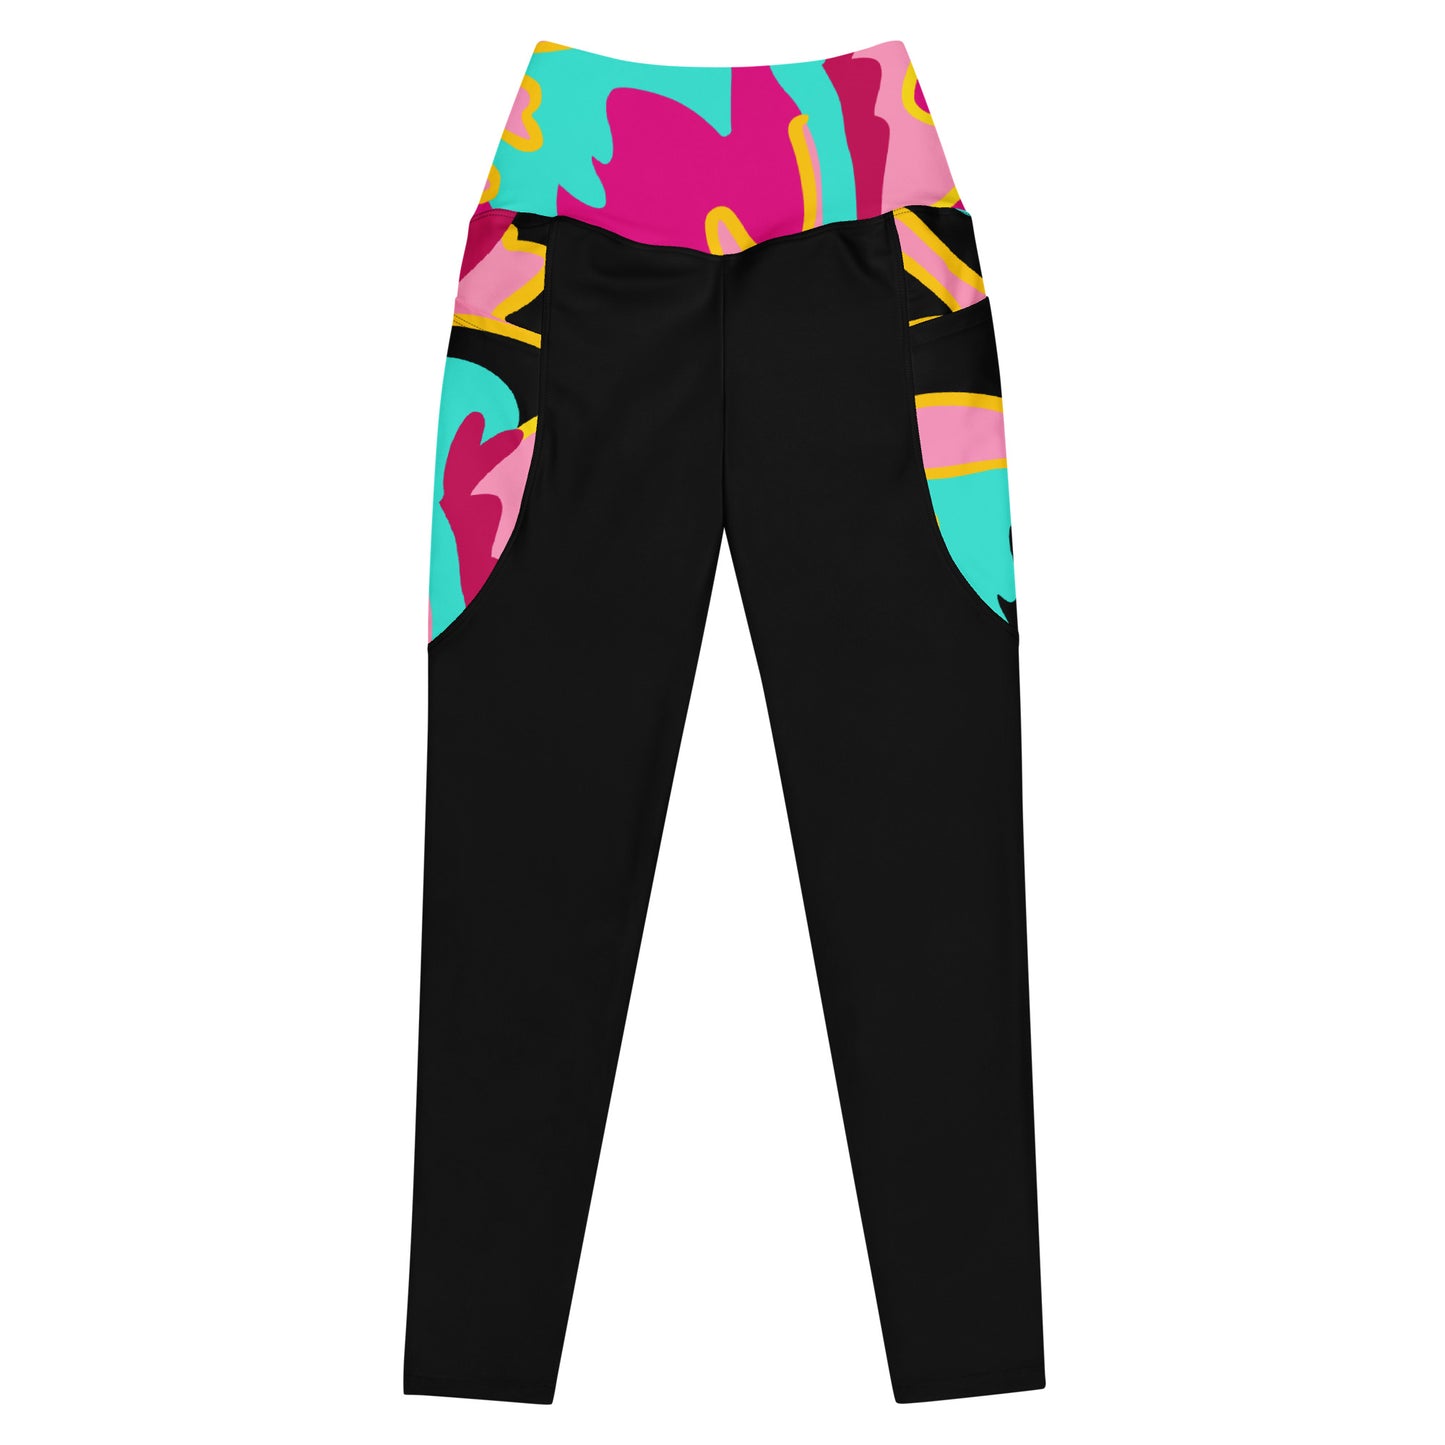 Body Love "New Classic" Leggings with Pockets